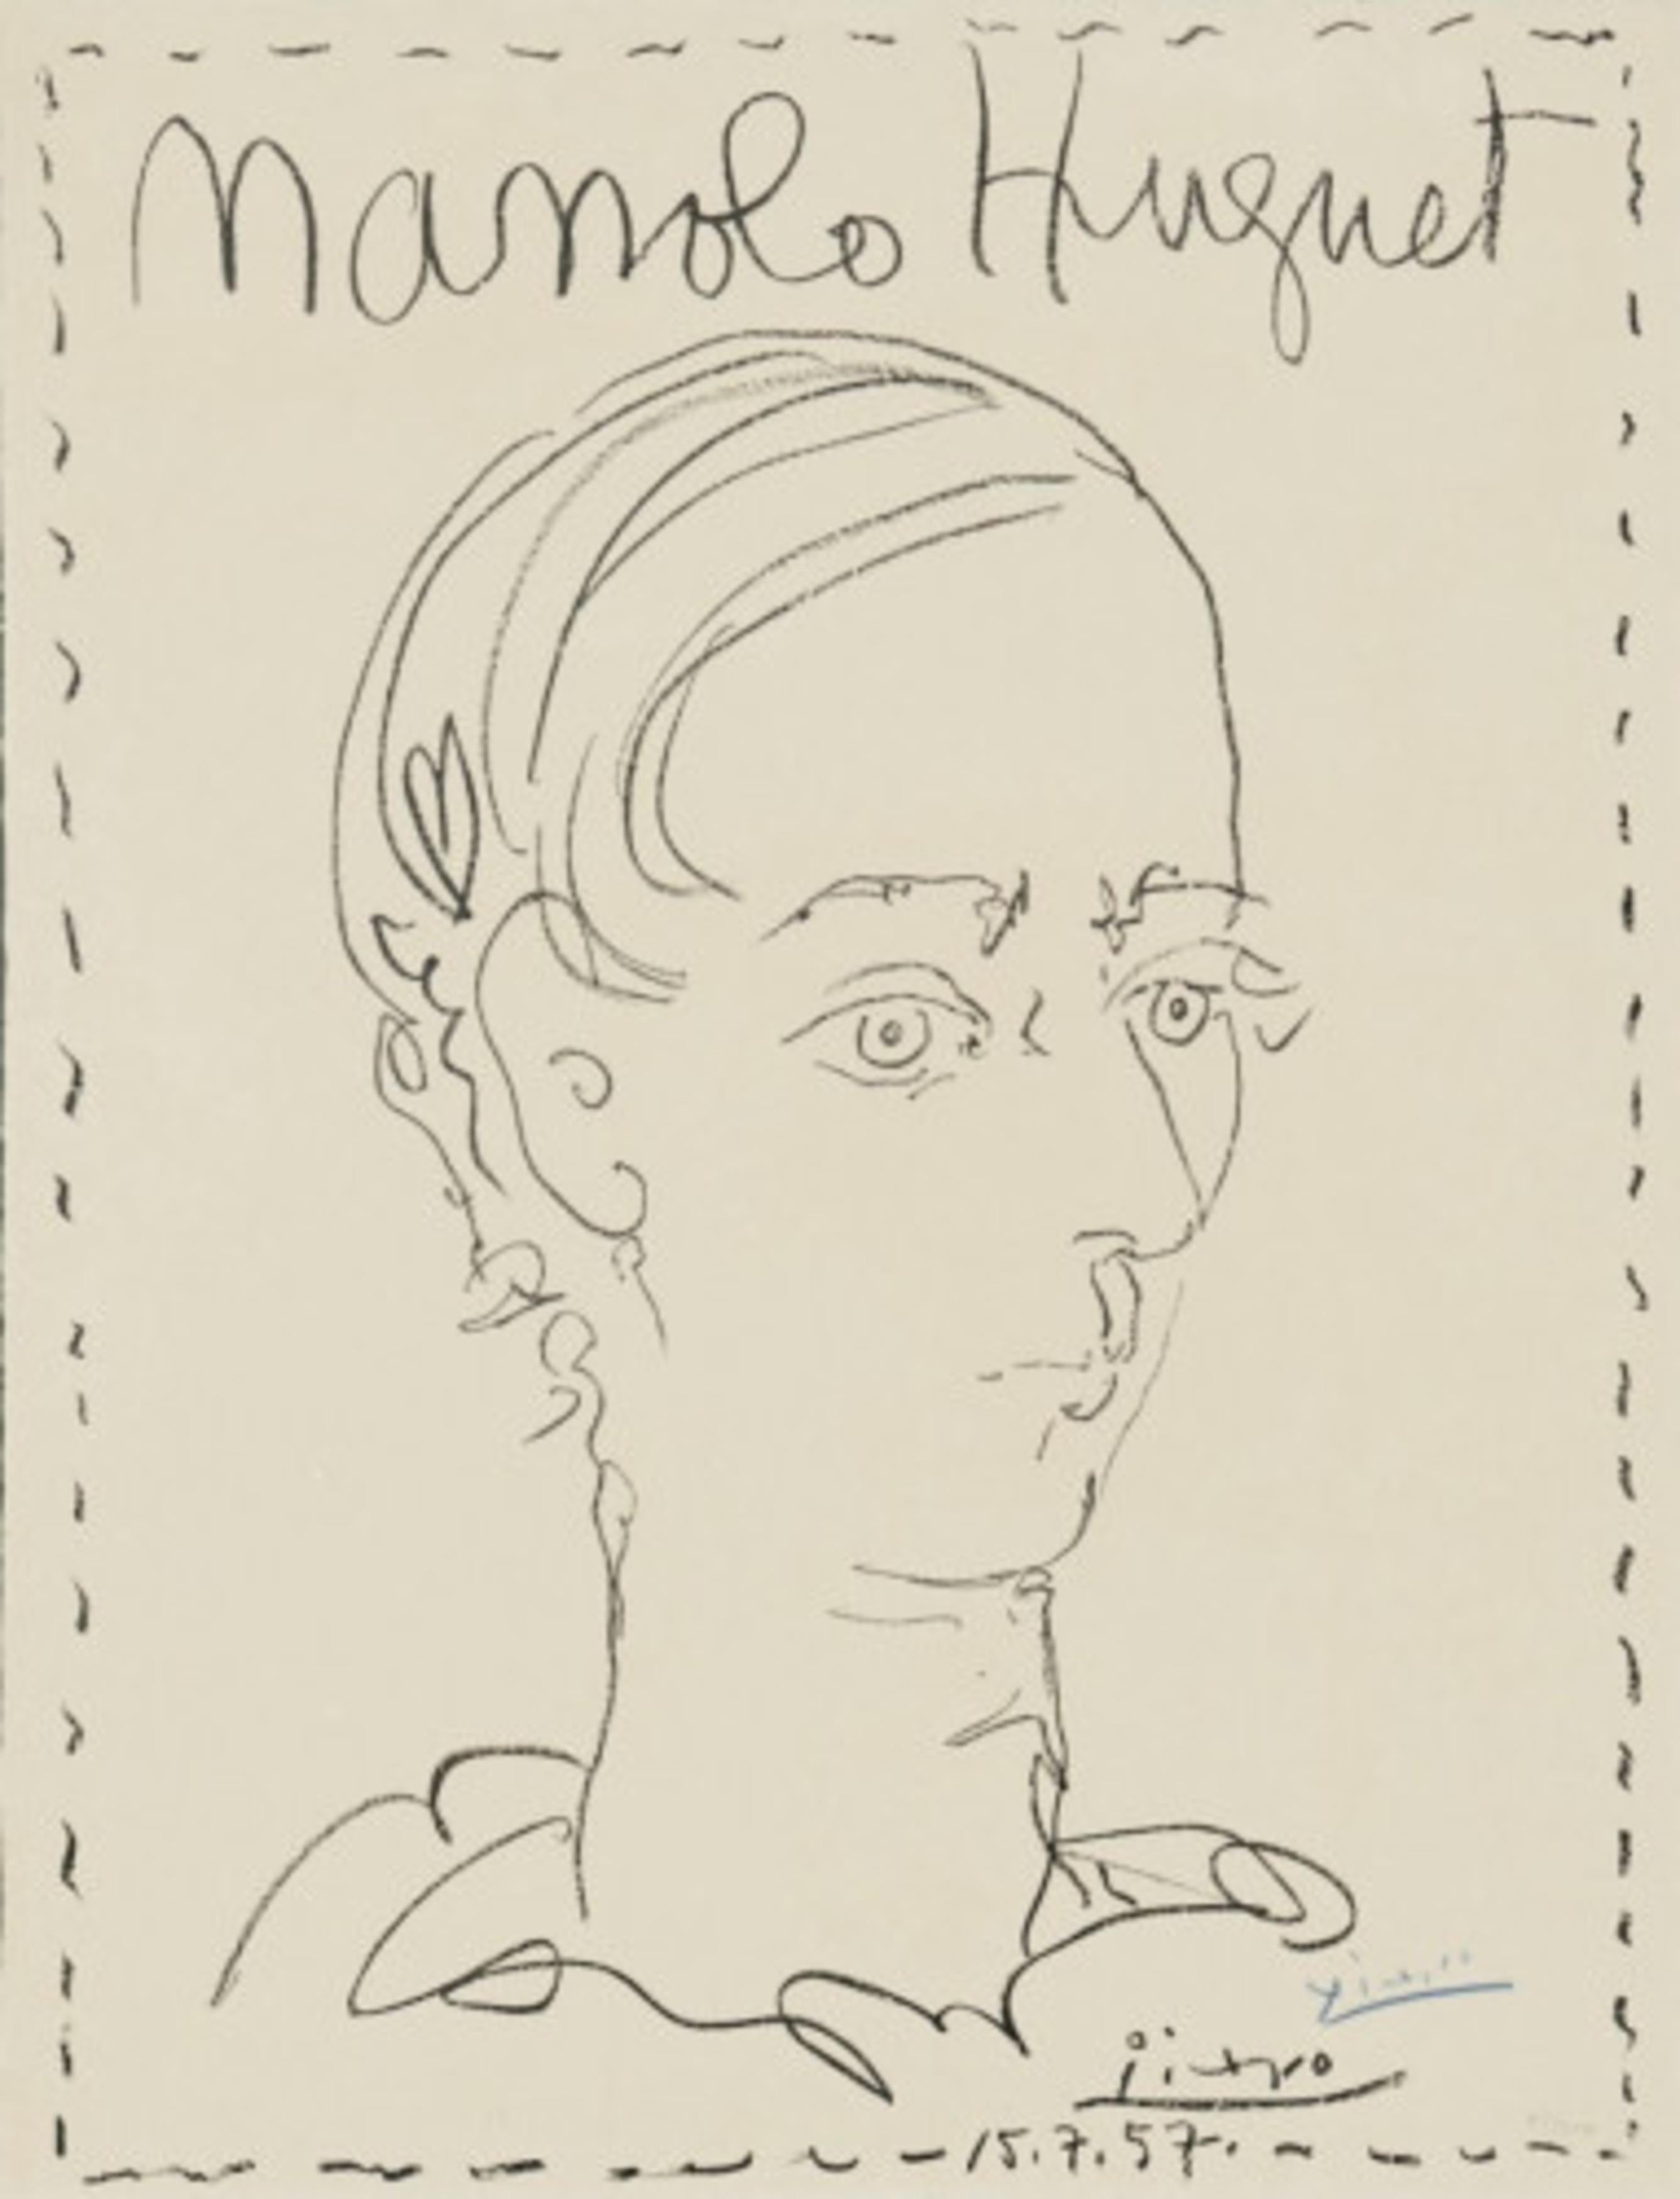 Manolo Huguet - Print by Pablo Picasso